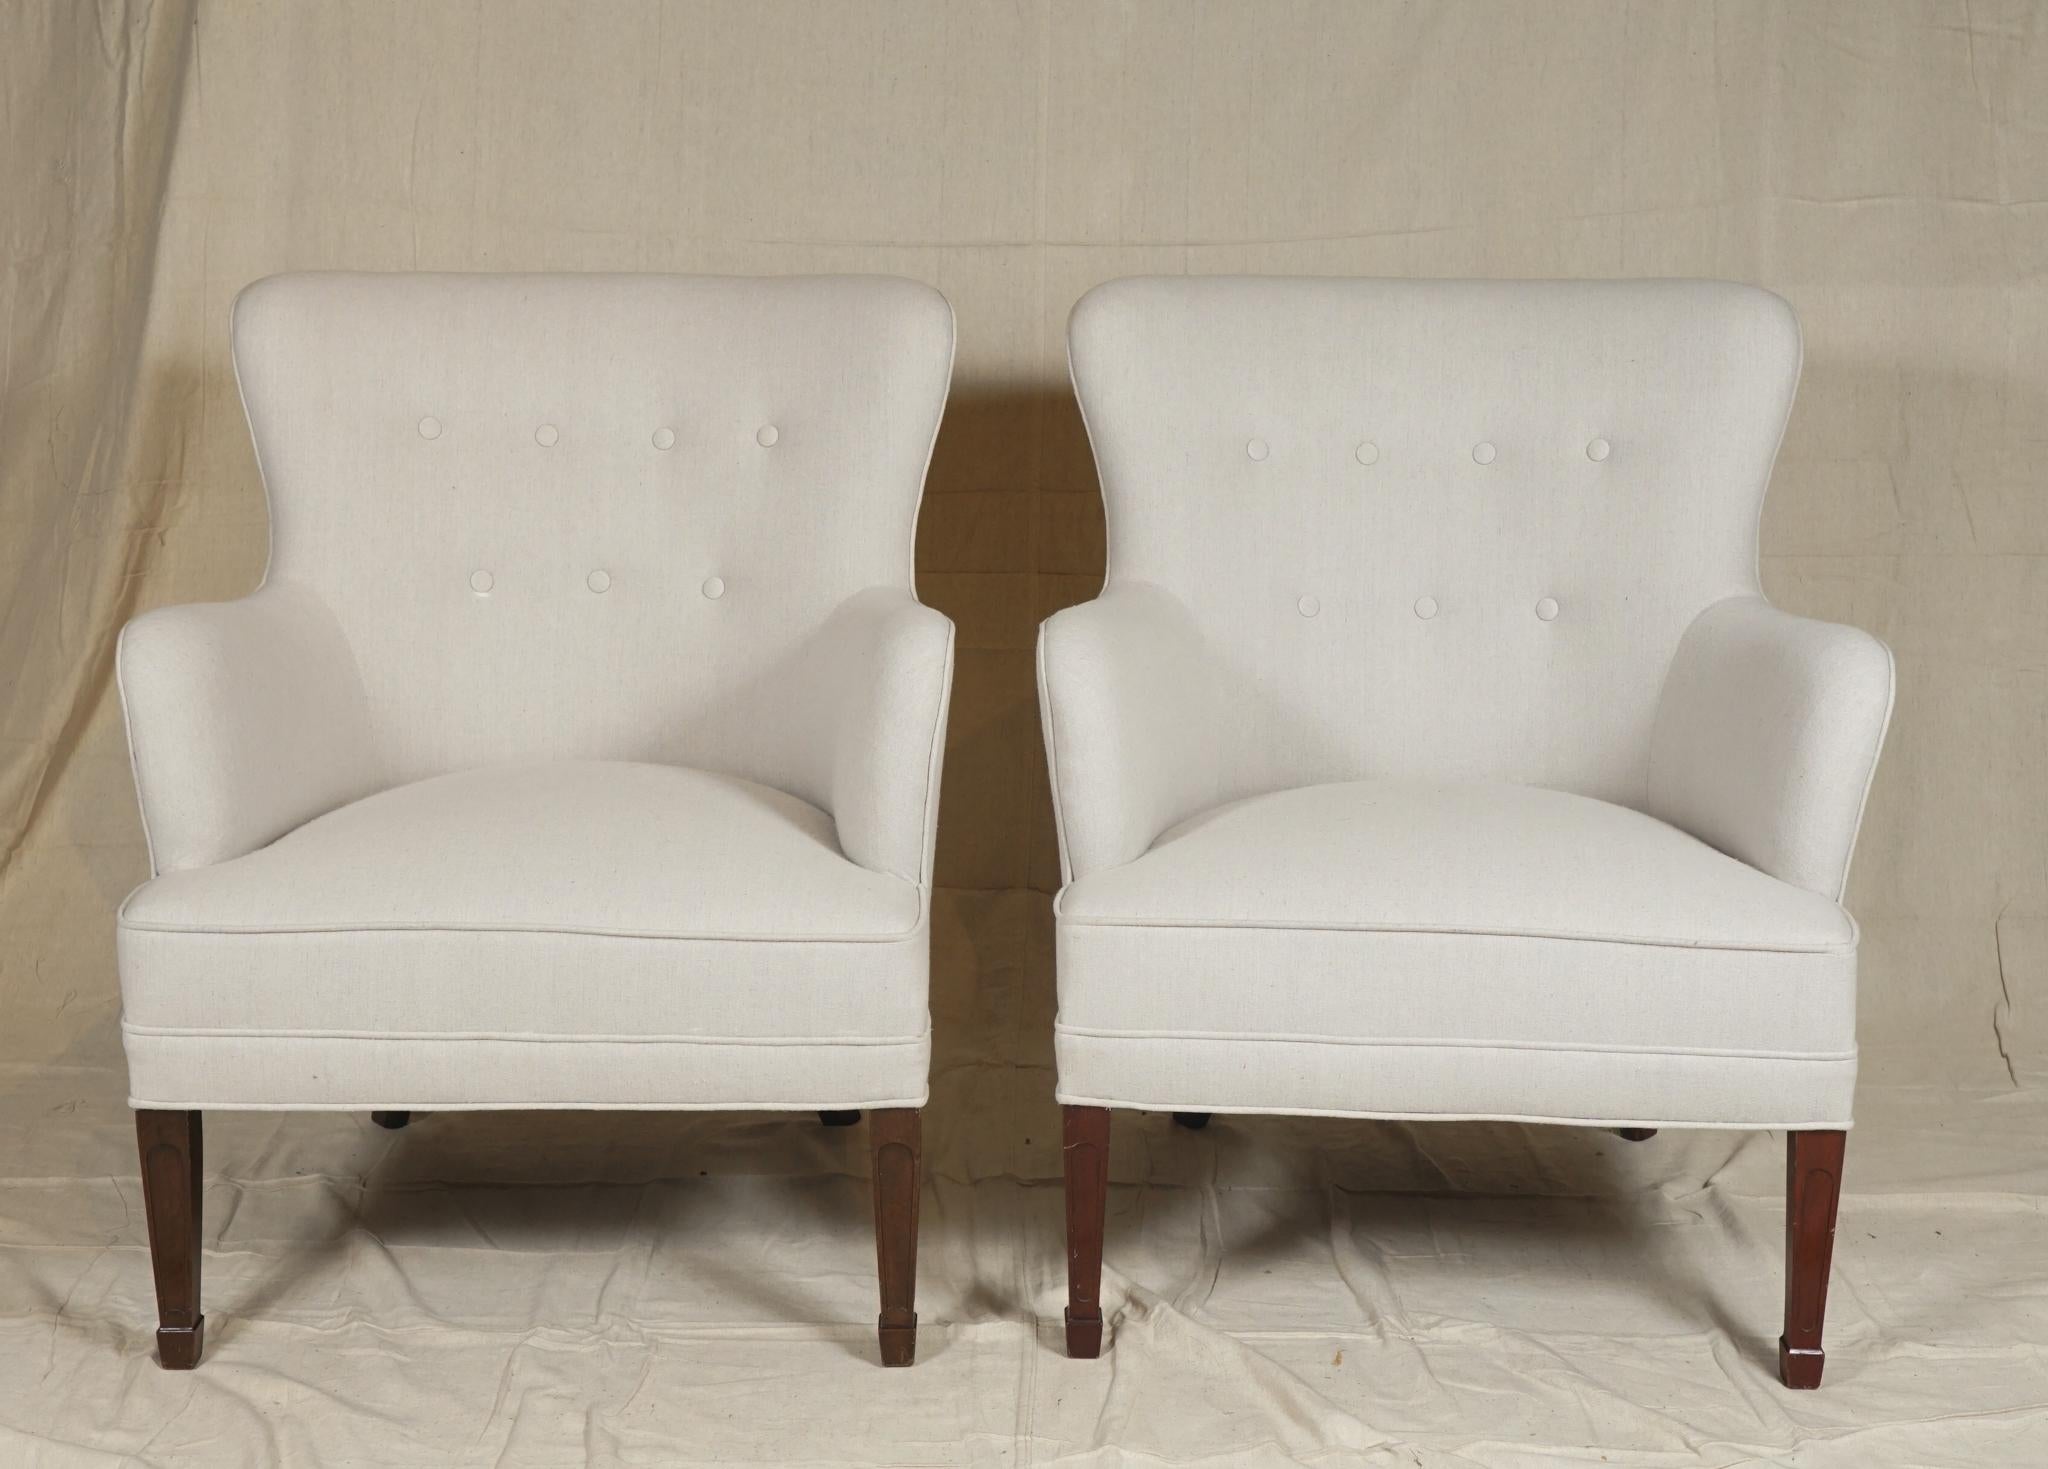 An elegant sofa and pair of matching armchairs by Danish designer Frits Henningsen
(sofa 31 H, 29 D, 54 W, 29 D, chairs 31 H, 26 W, 29 D, 16 SH)

Frits Henningsen (1889–1965) was a Danish furniture designer and cabinet maker who achieved high